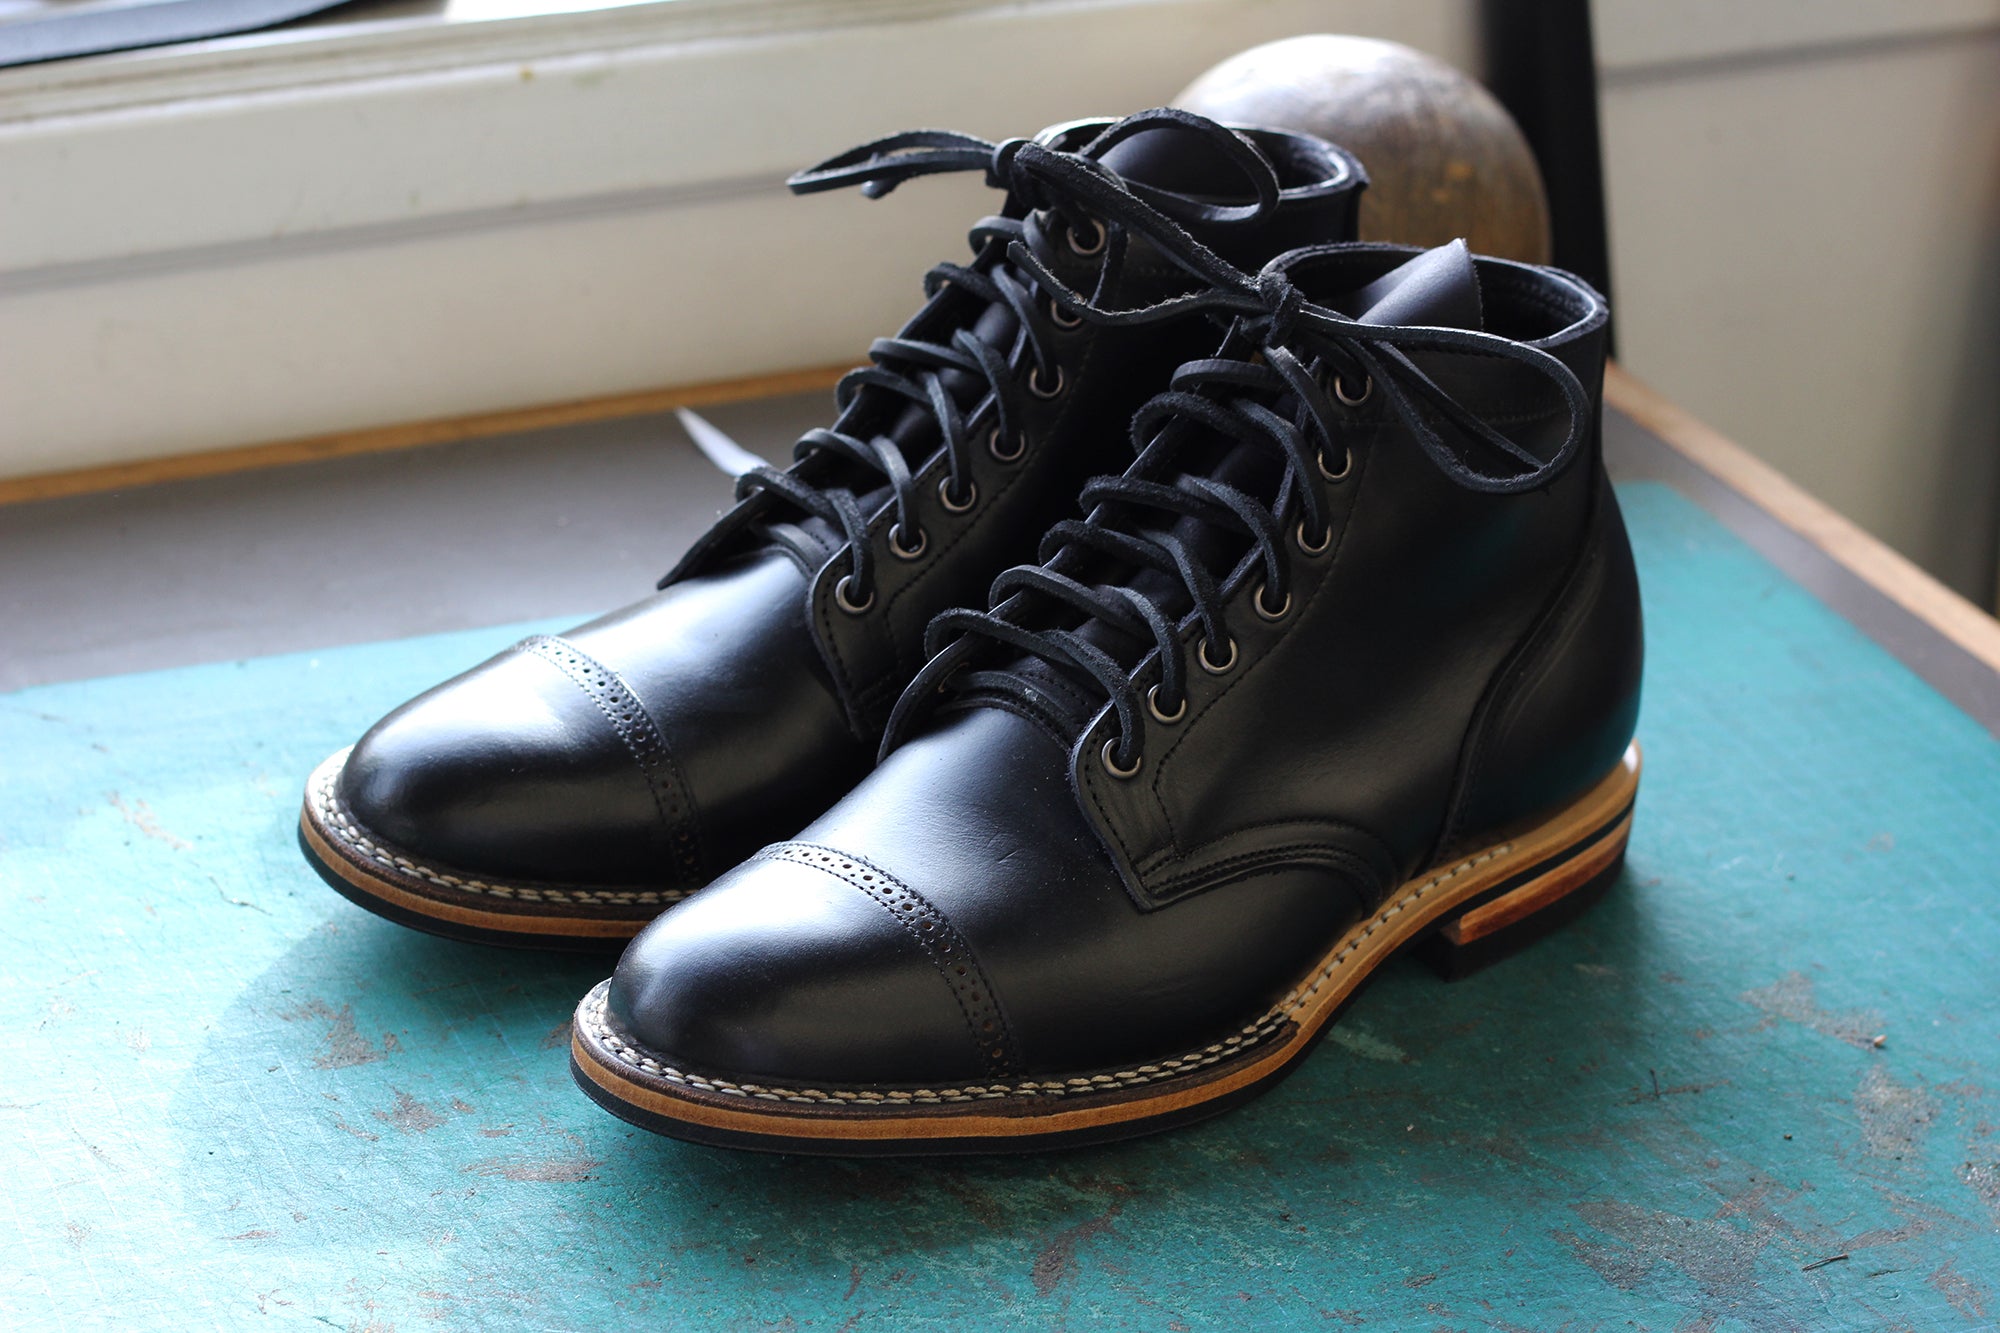 Viberg for 3sixteen: Stealth Service Boots.